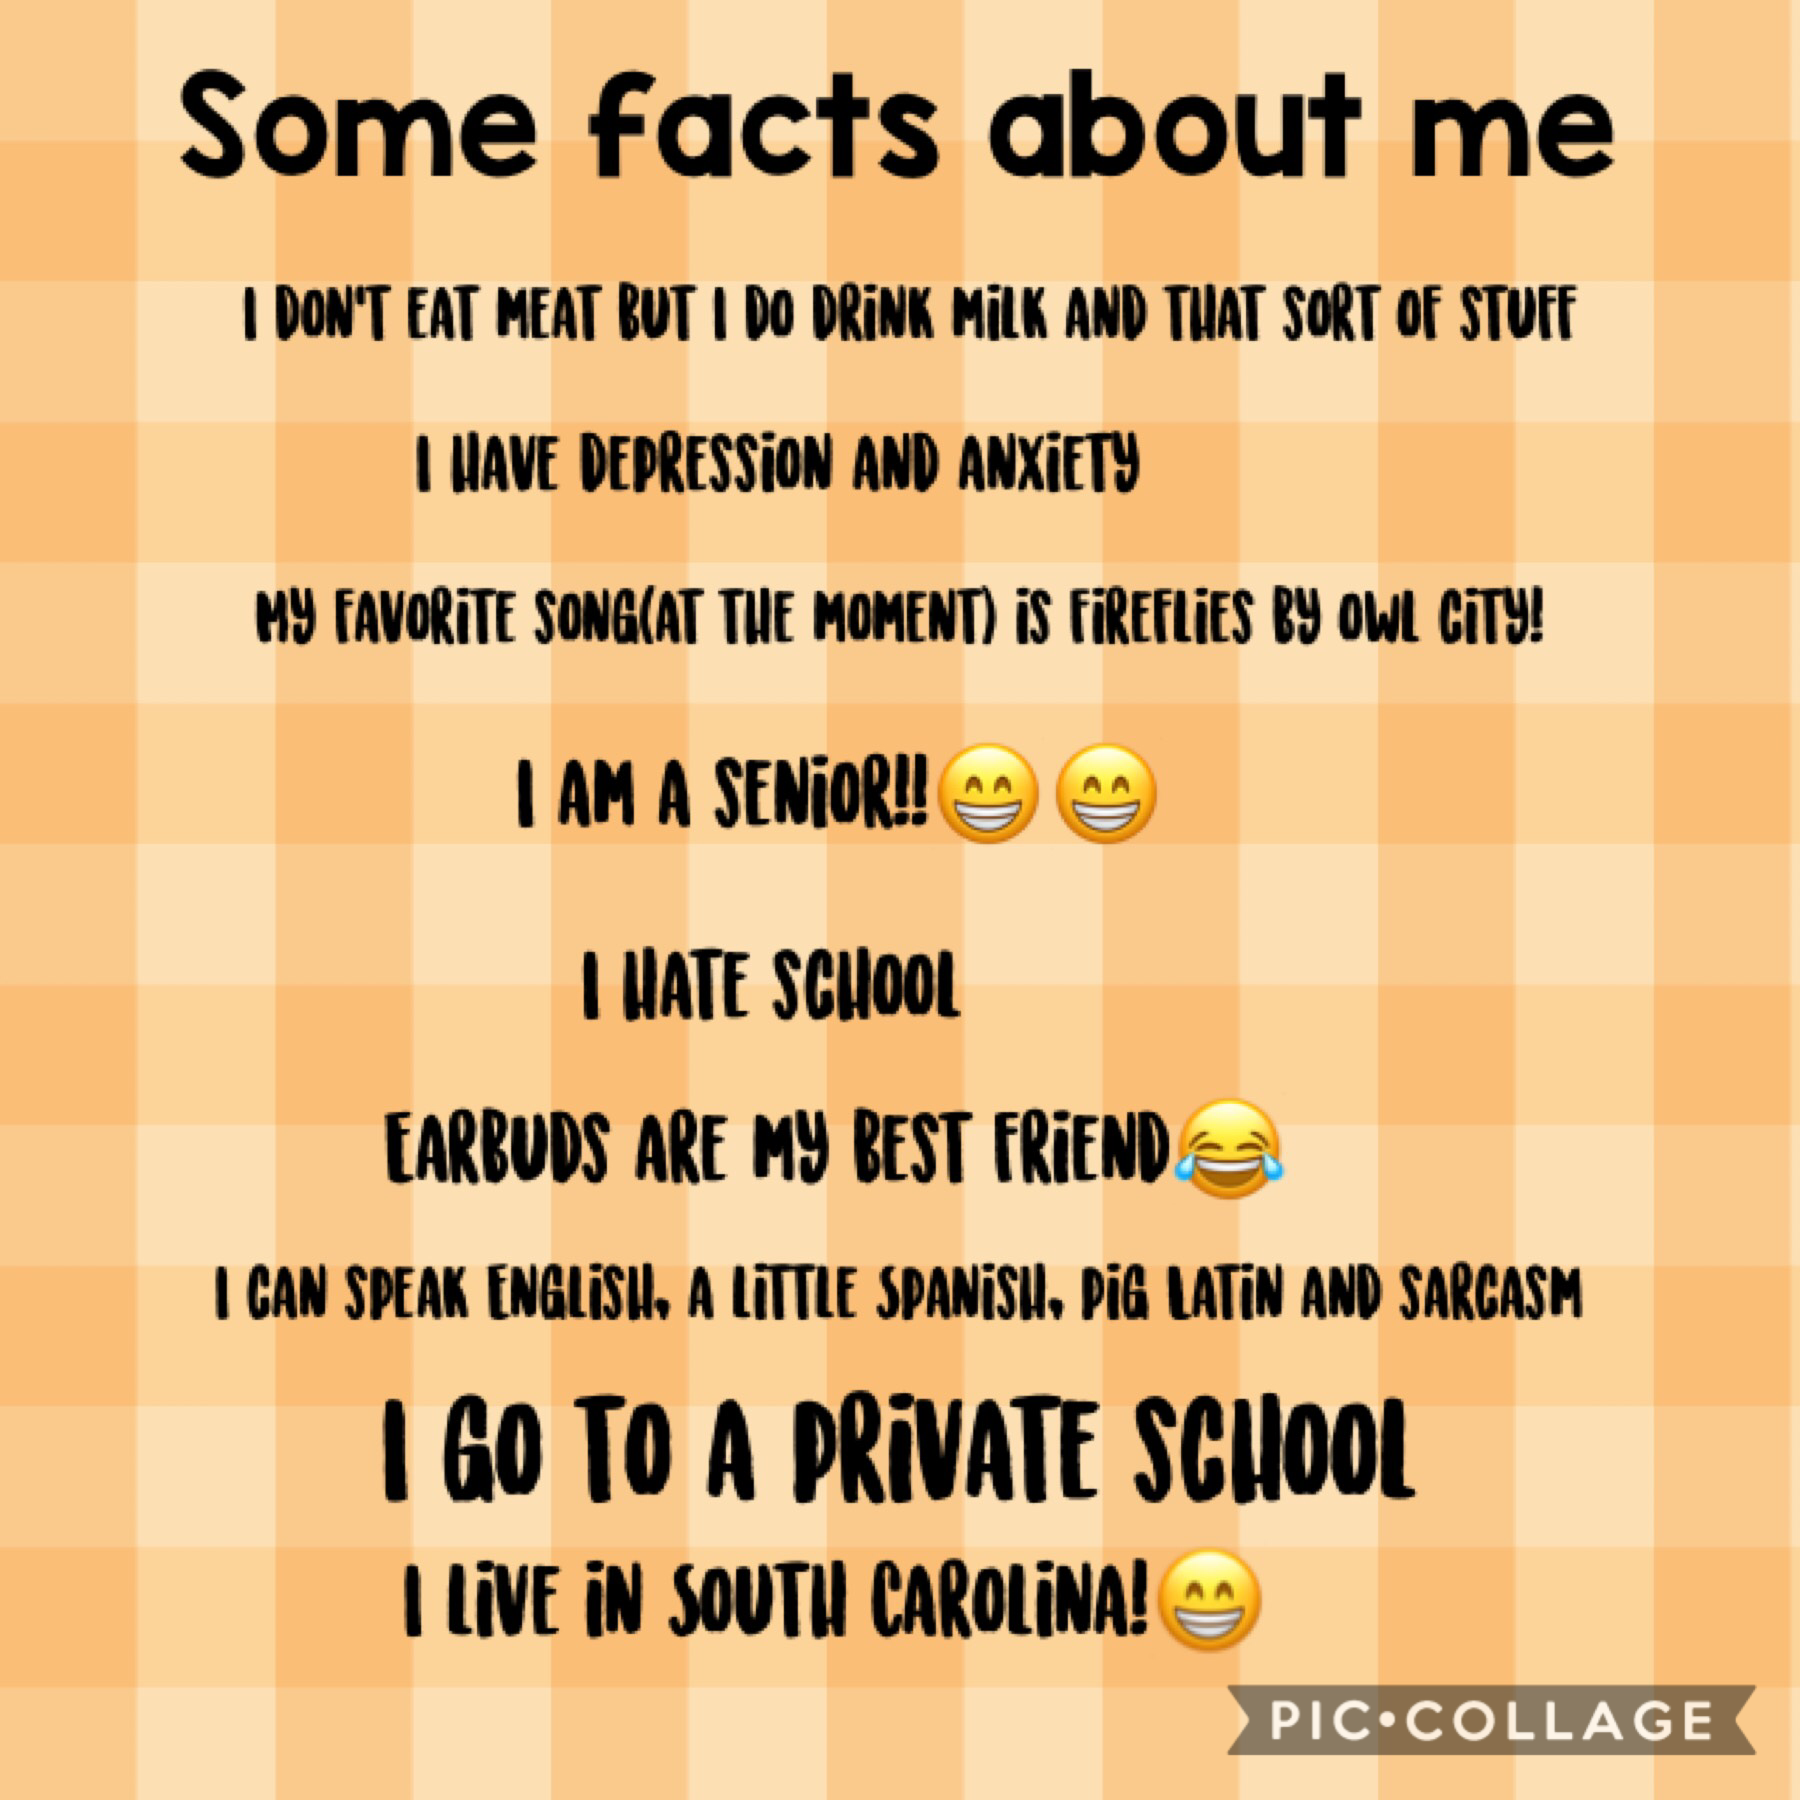 Some fun facts